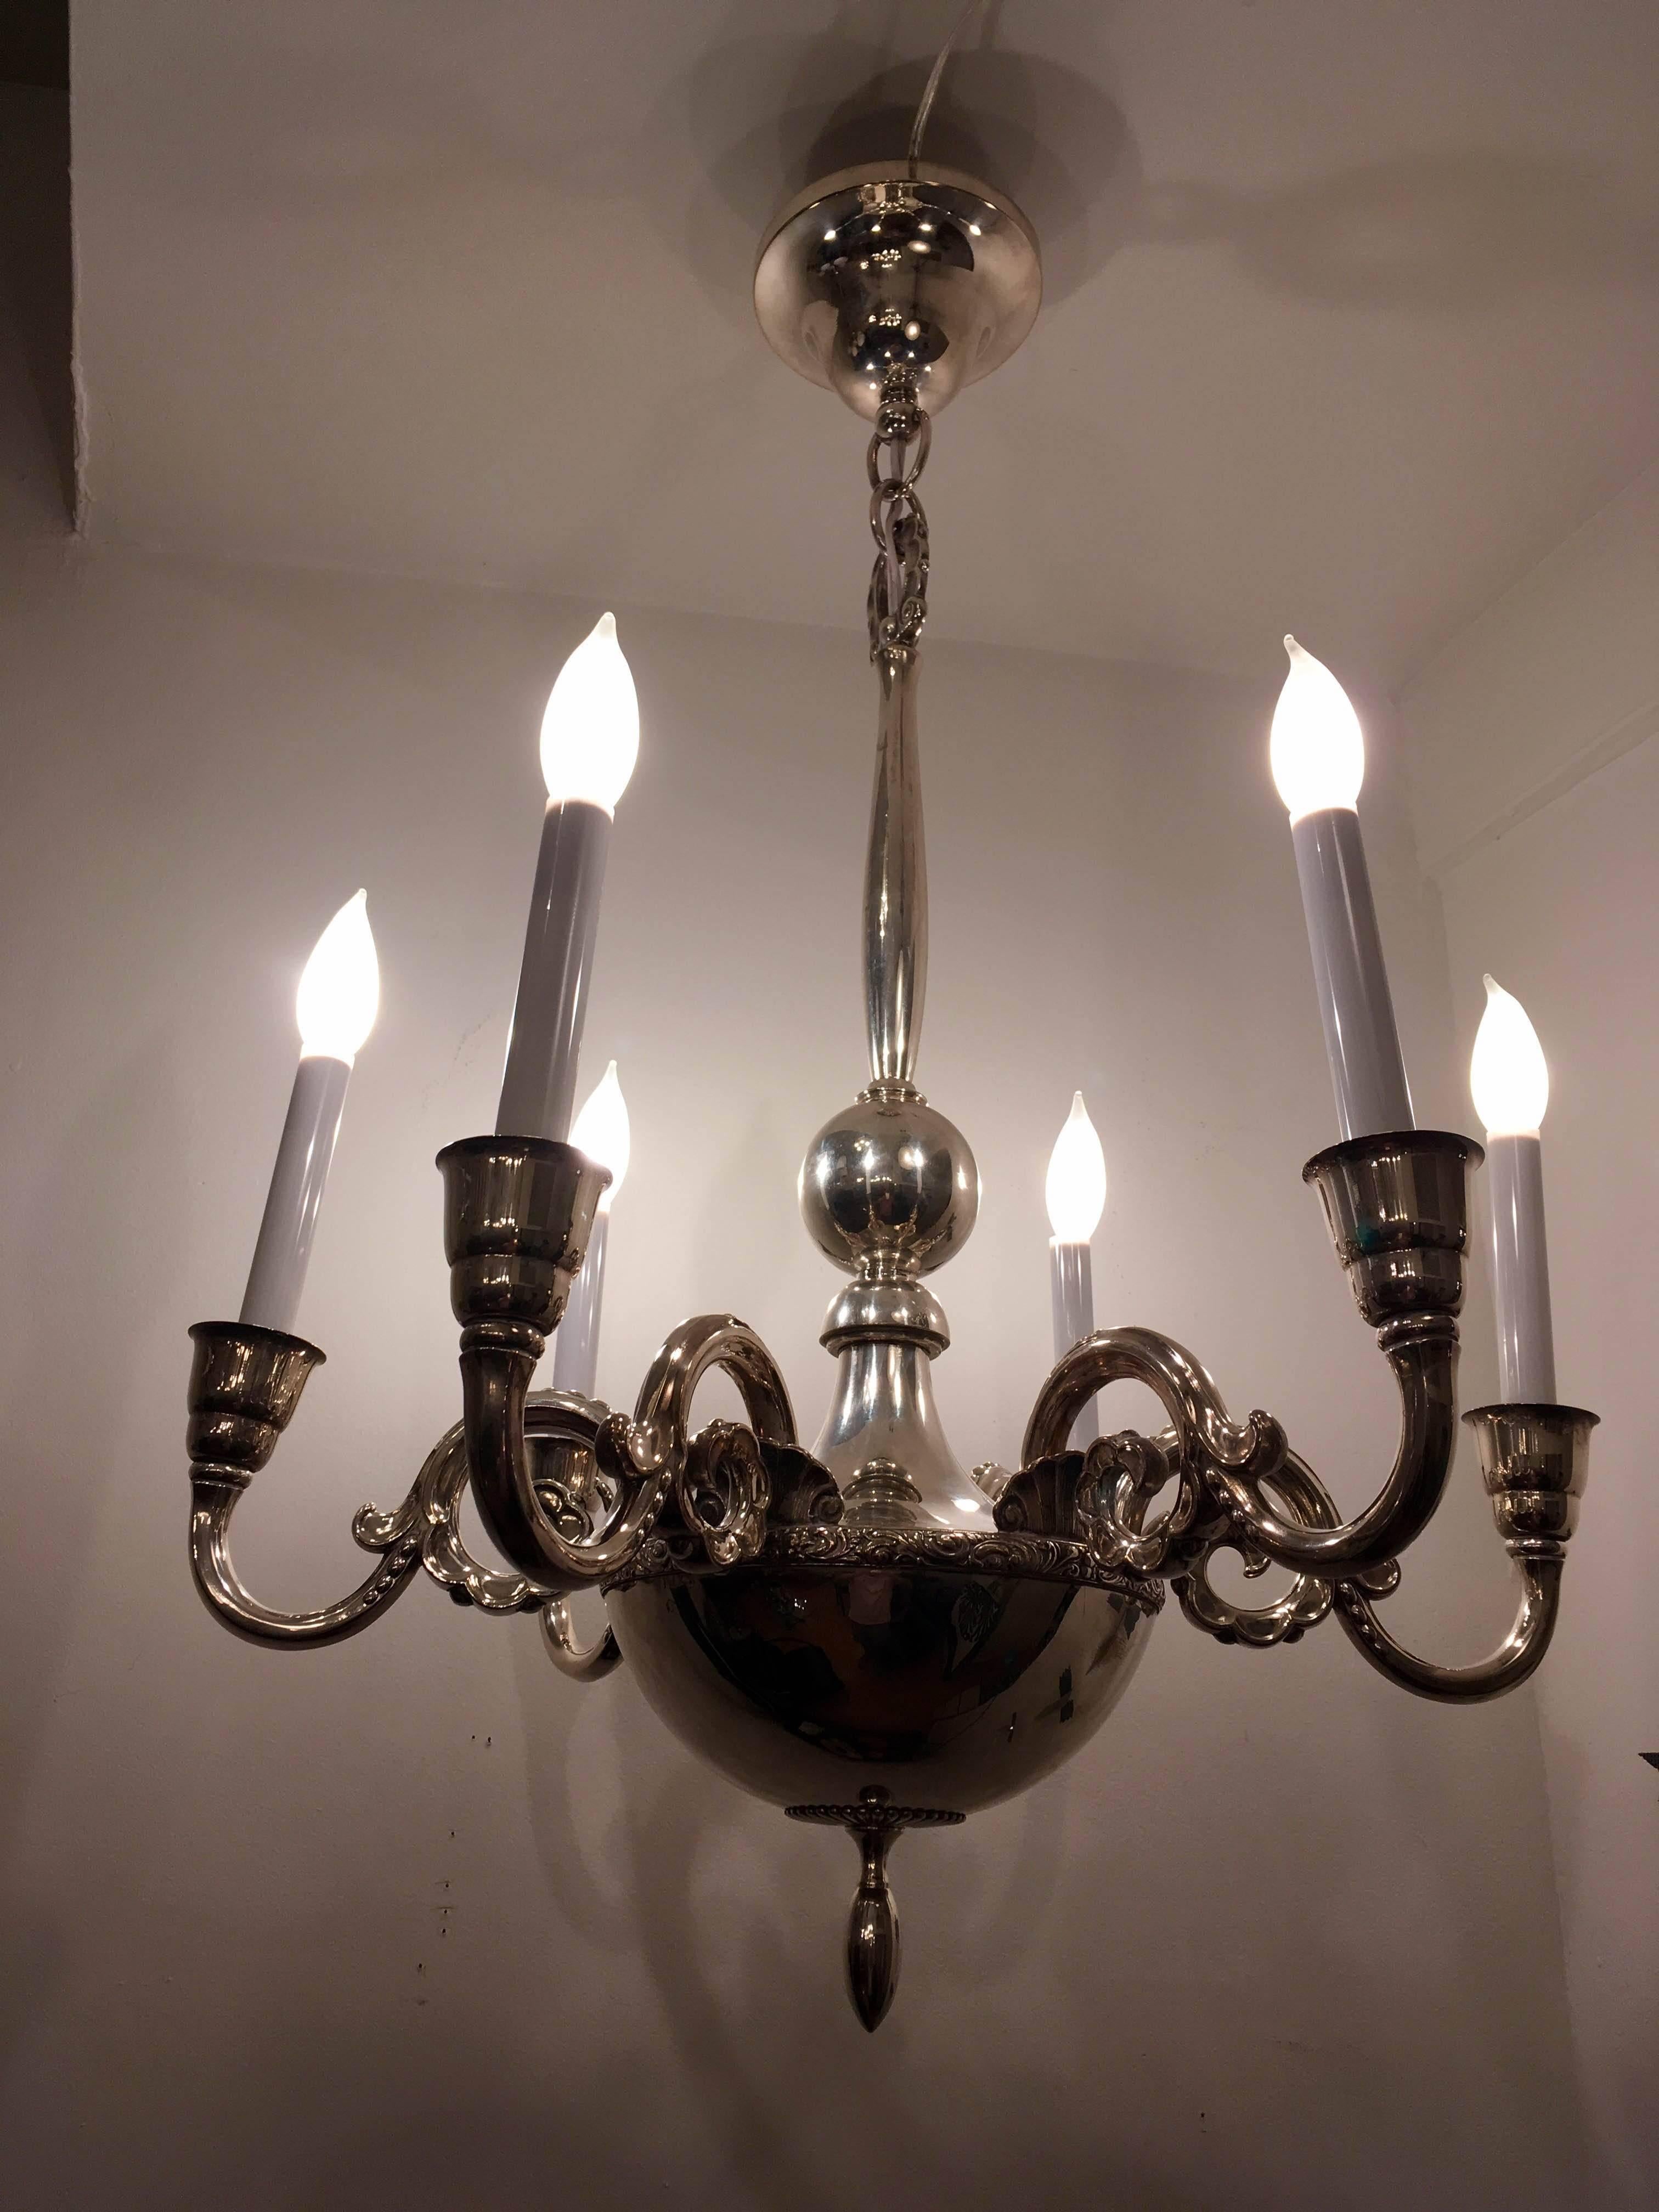 Silver Plate Swedish Silver 1920s Chandelier by Elis Bergh for CG Hallberg